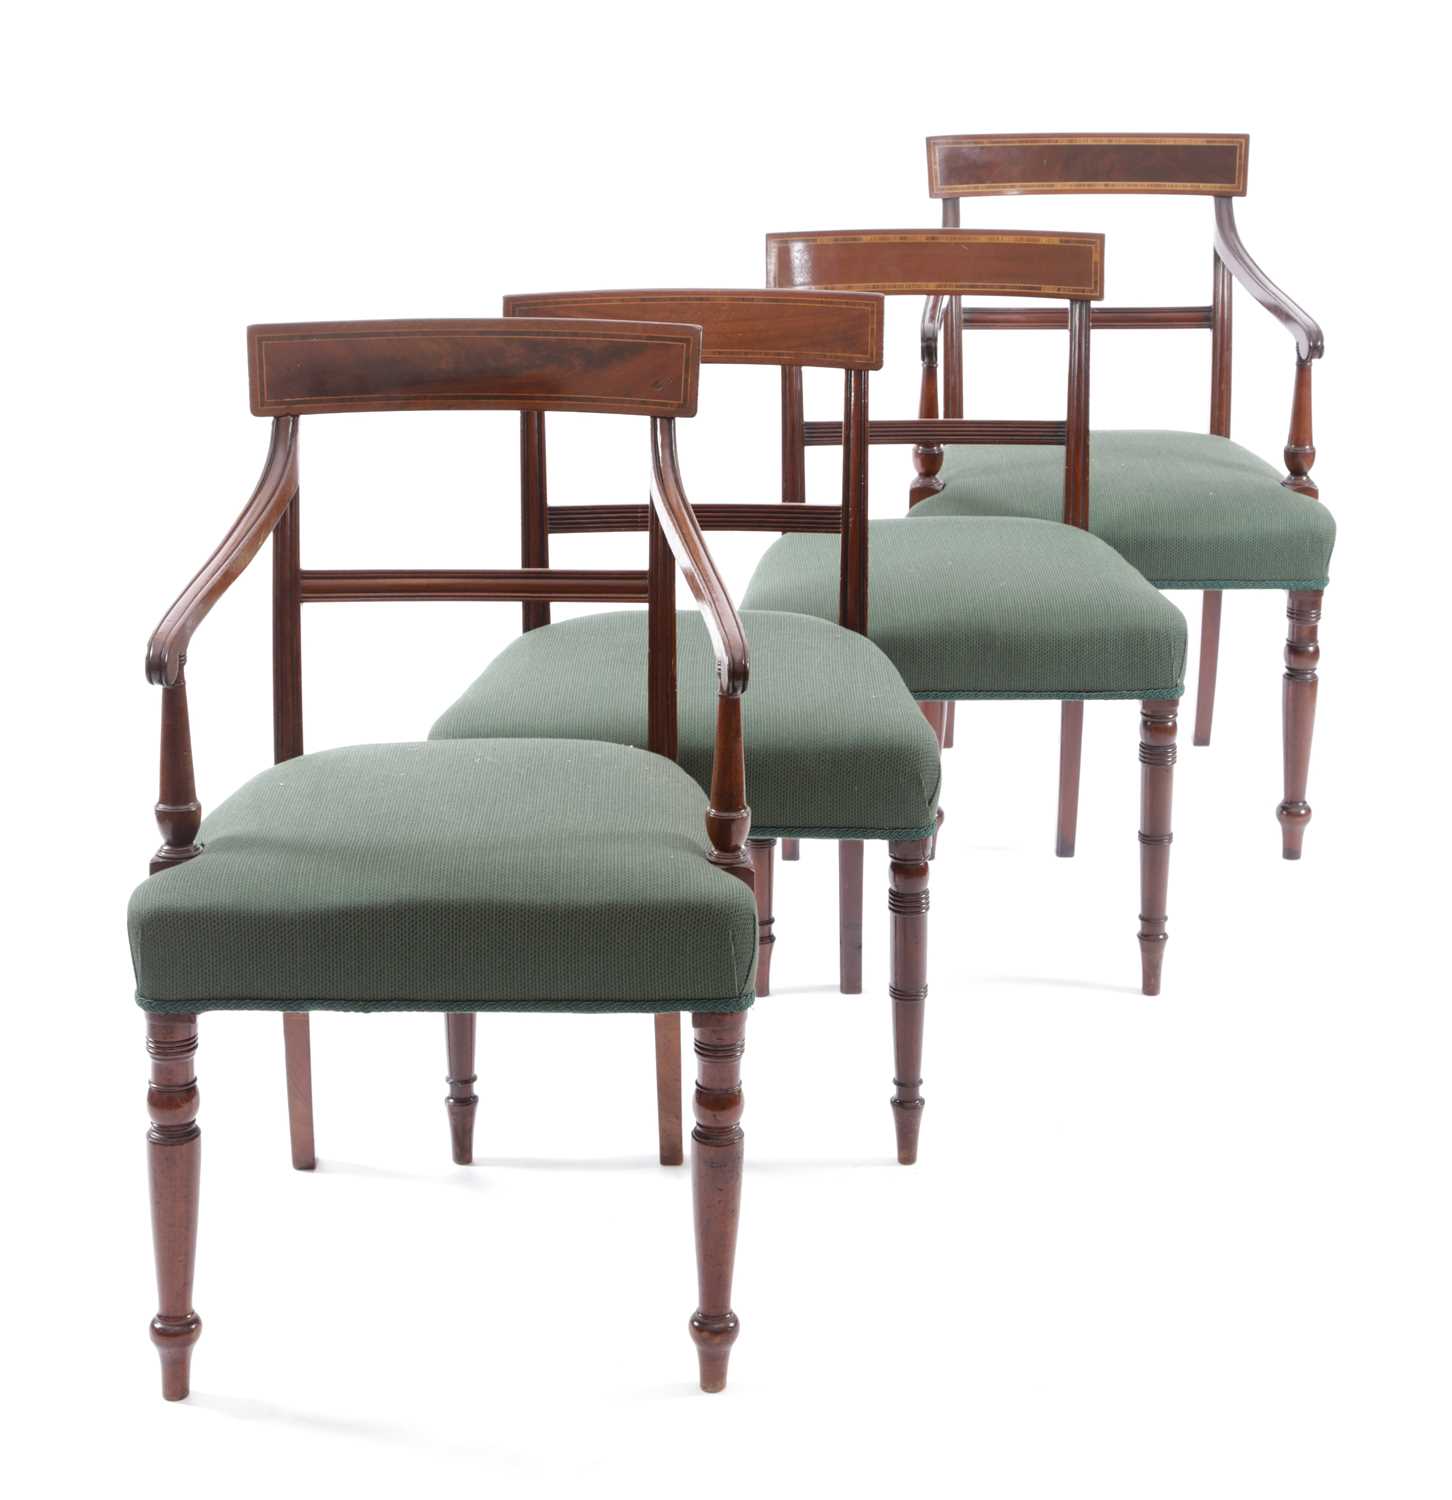 FOUR MAHOGANY DINING CHAIRS 19TH CENTURY each with a curved toprail with kingwood banding, on turned